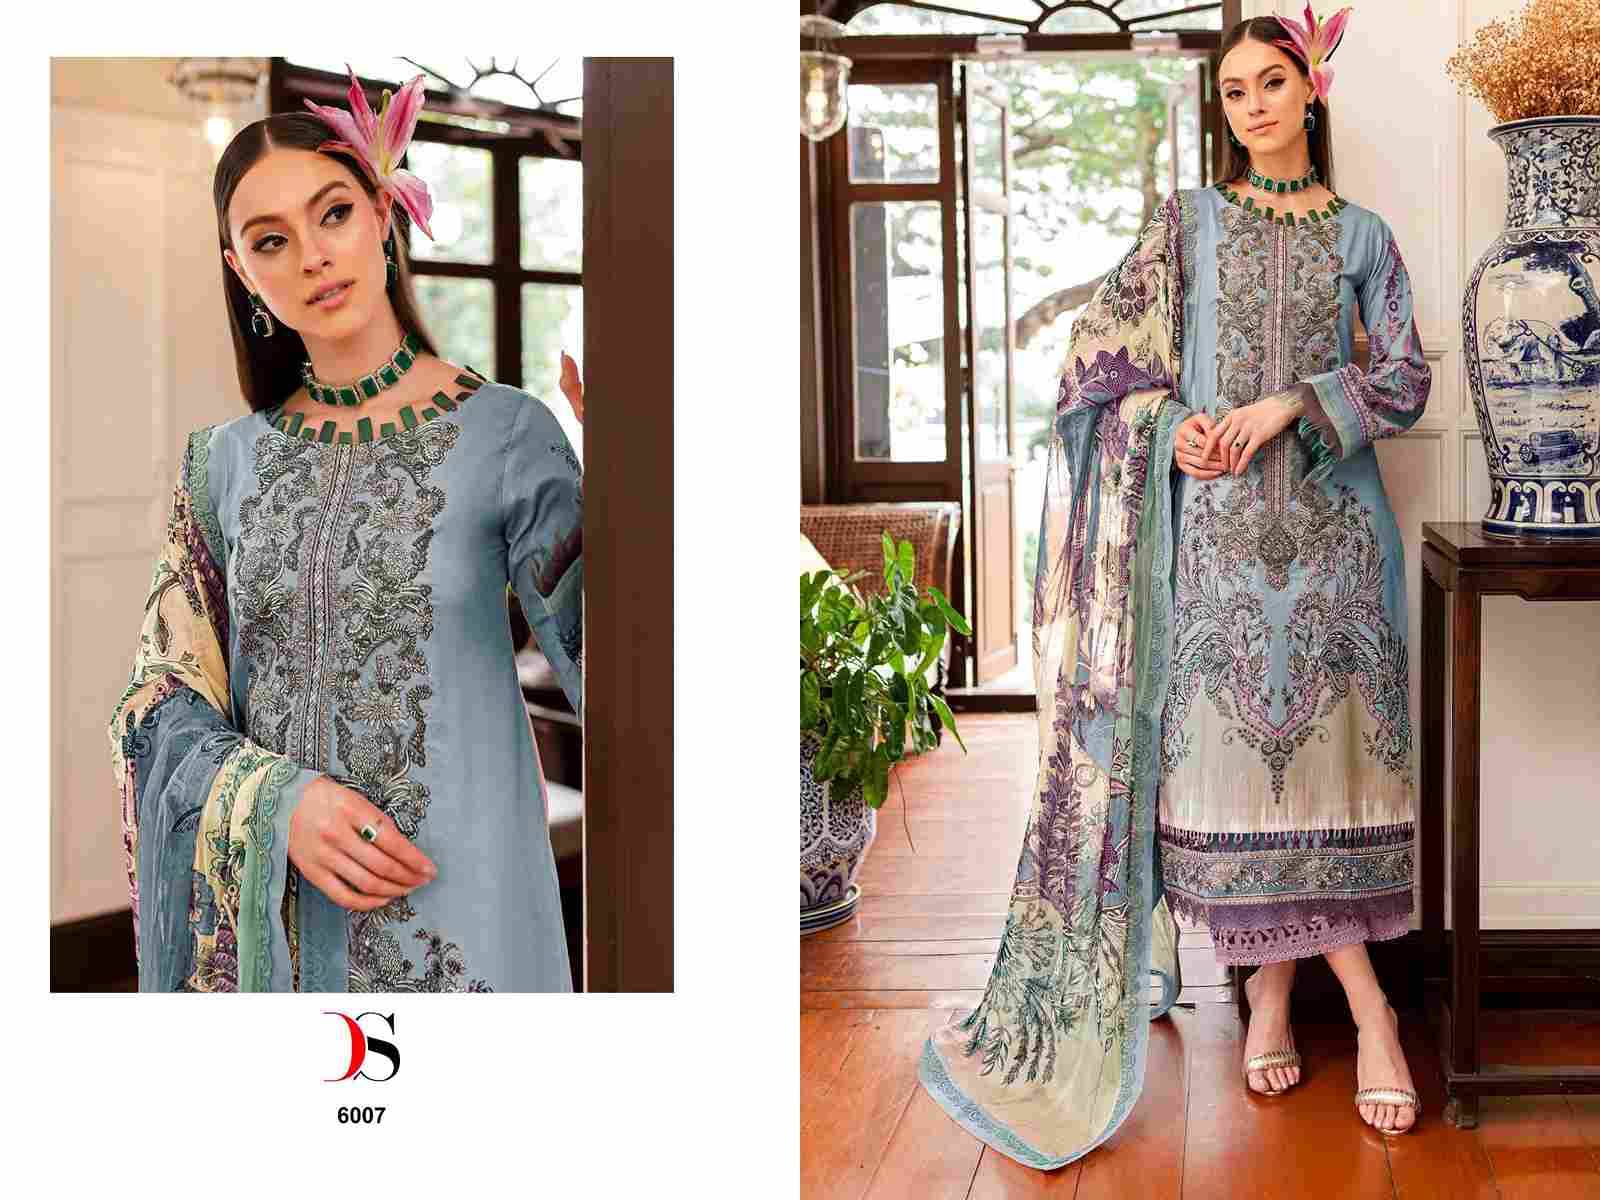 Firdous Queens Court Vol-6 By Deepsy Suits 6001 To 6008 Series Designer Pakistani Suits Beautiful Stylish Fancy Colorful Party Wear & Occasional Wear Pure Cotton Print Embroidered Dresses At Wholesale Price